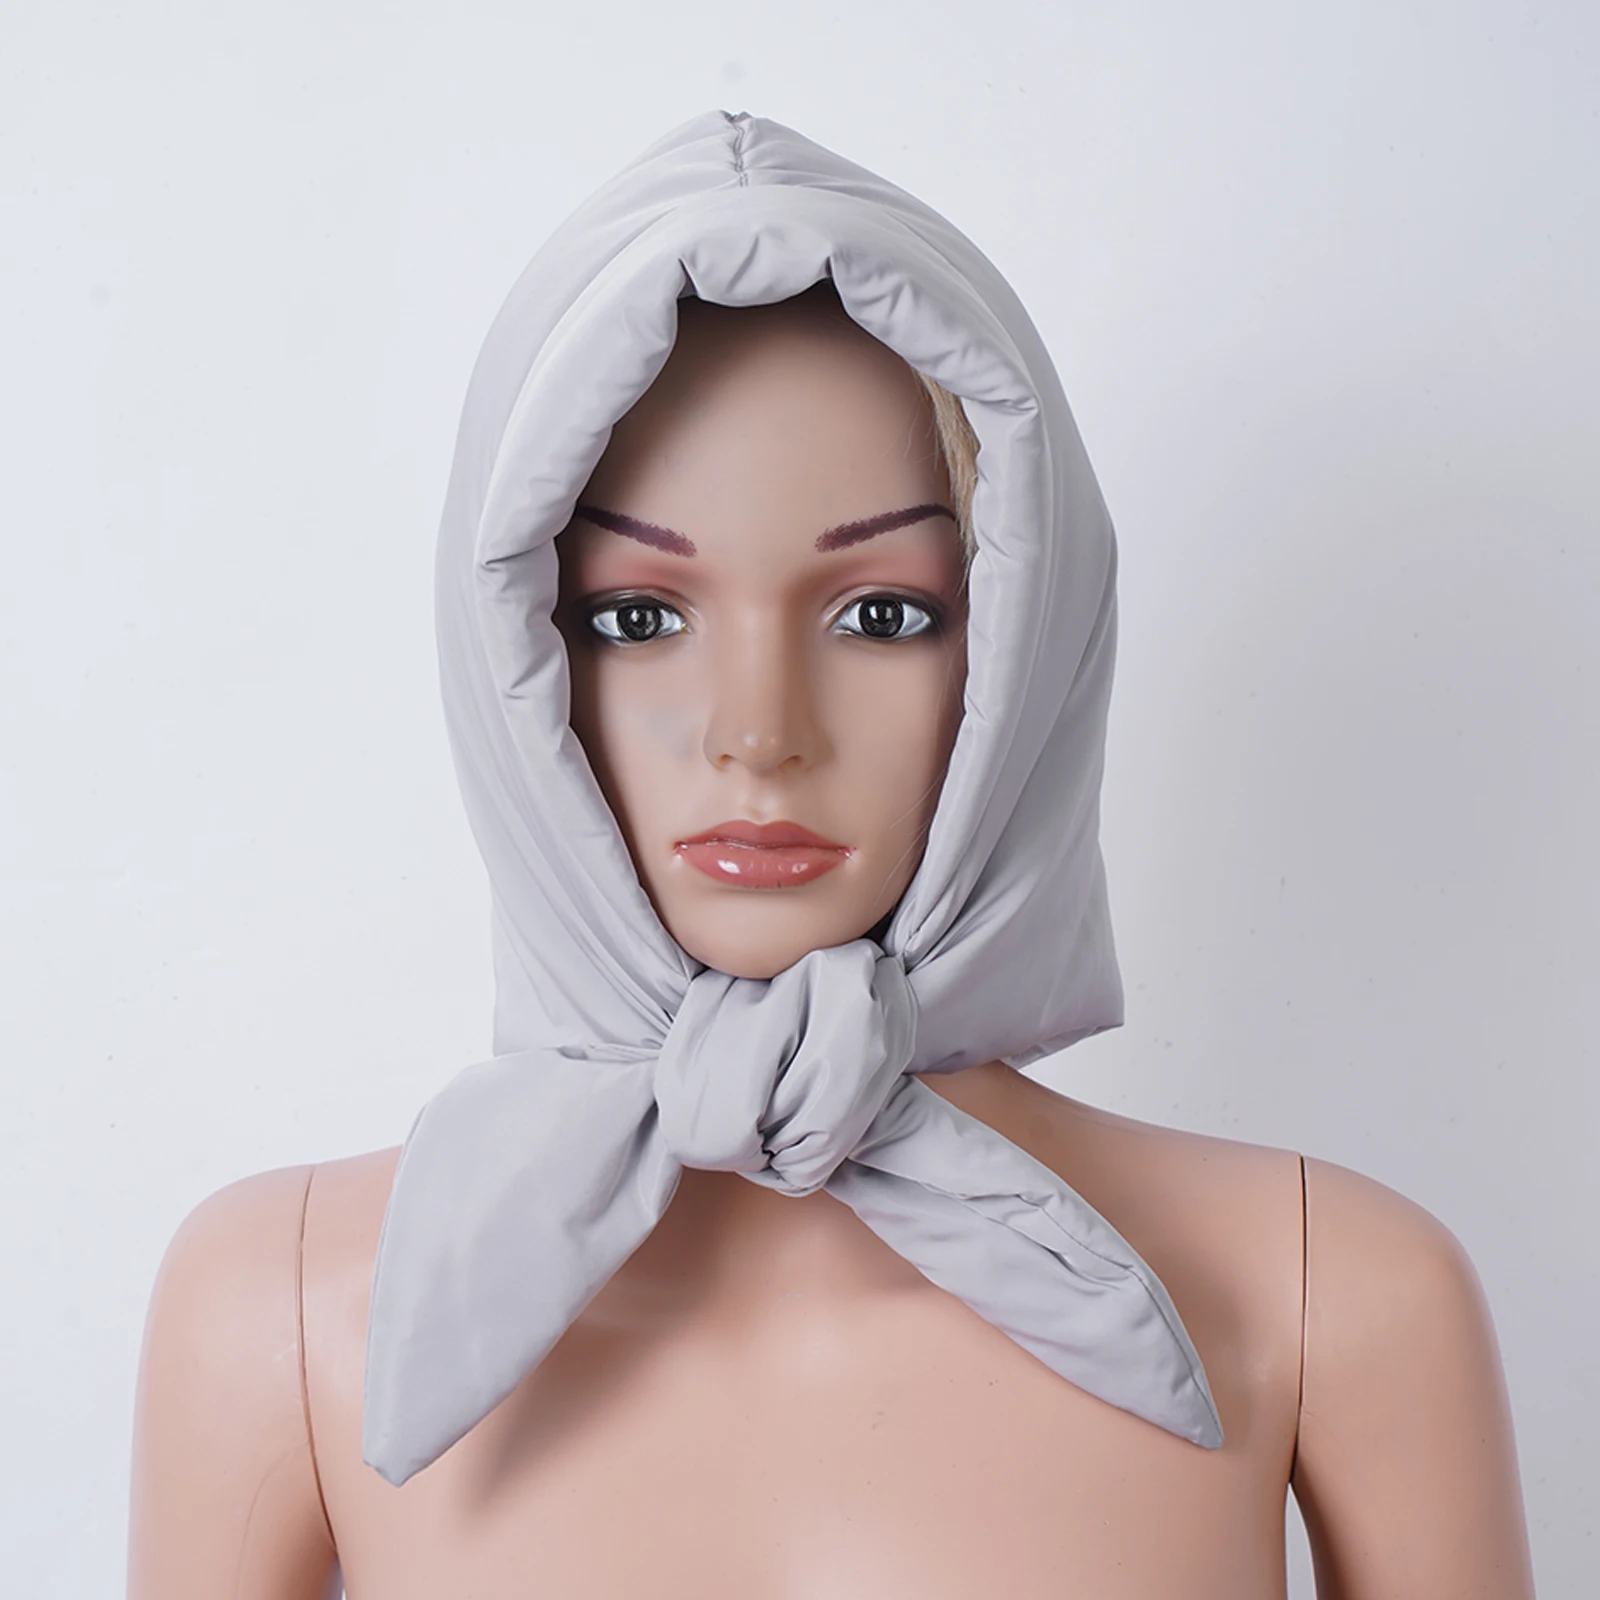 Inflatable Puffer Scarf